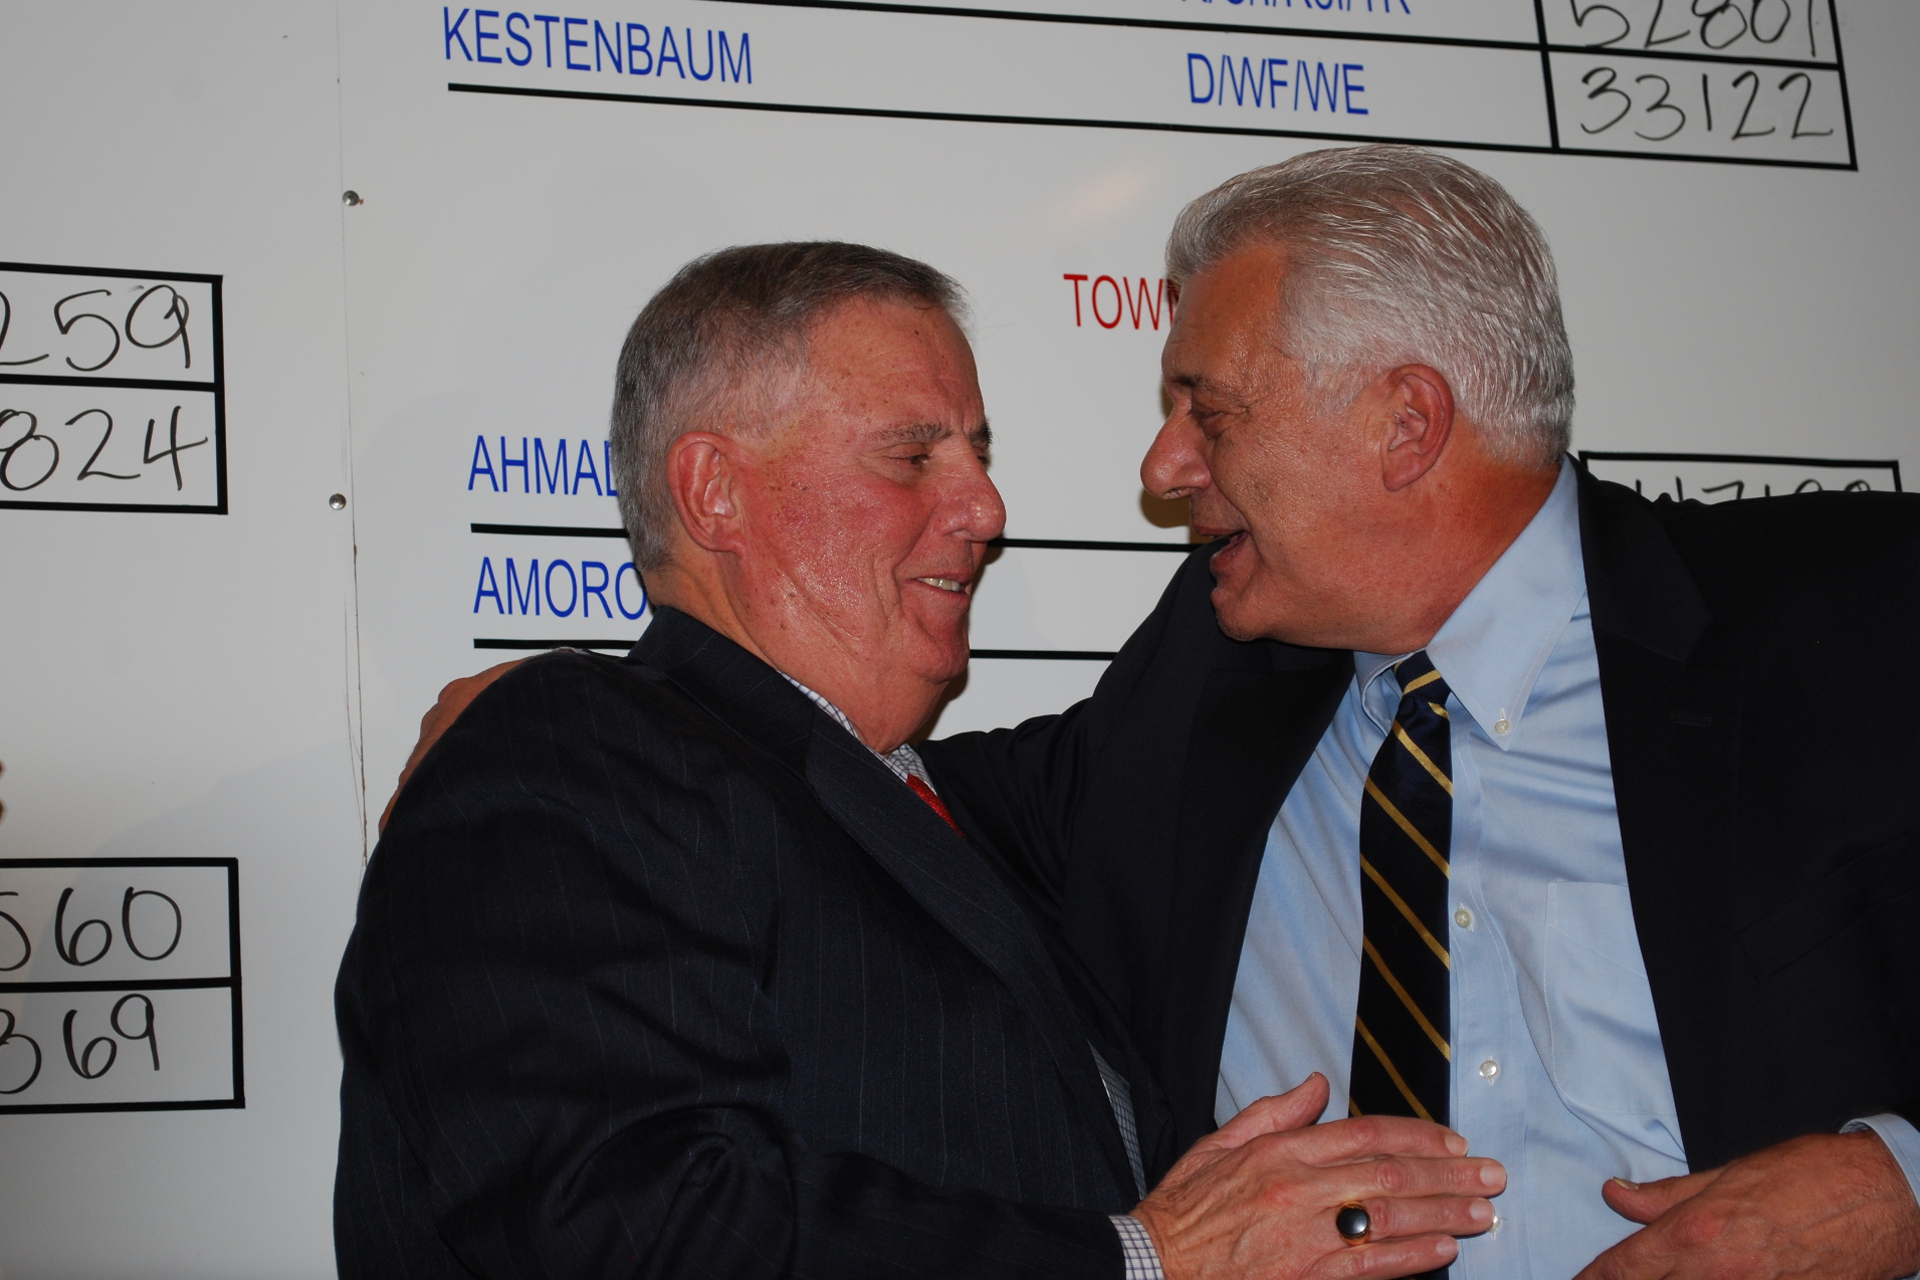 Nassau GOP boss (left) Joe Mondello and Oyster Bay Town Supervisor John Venditto (right) are all smiles despite early results showing the longtime supervisor losing his race. (Long Island Press) 